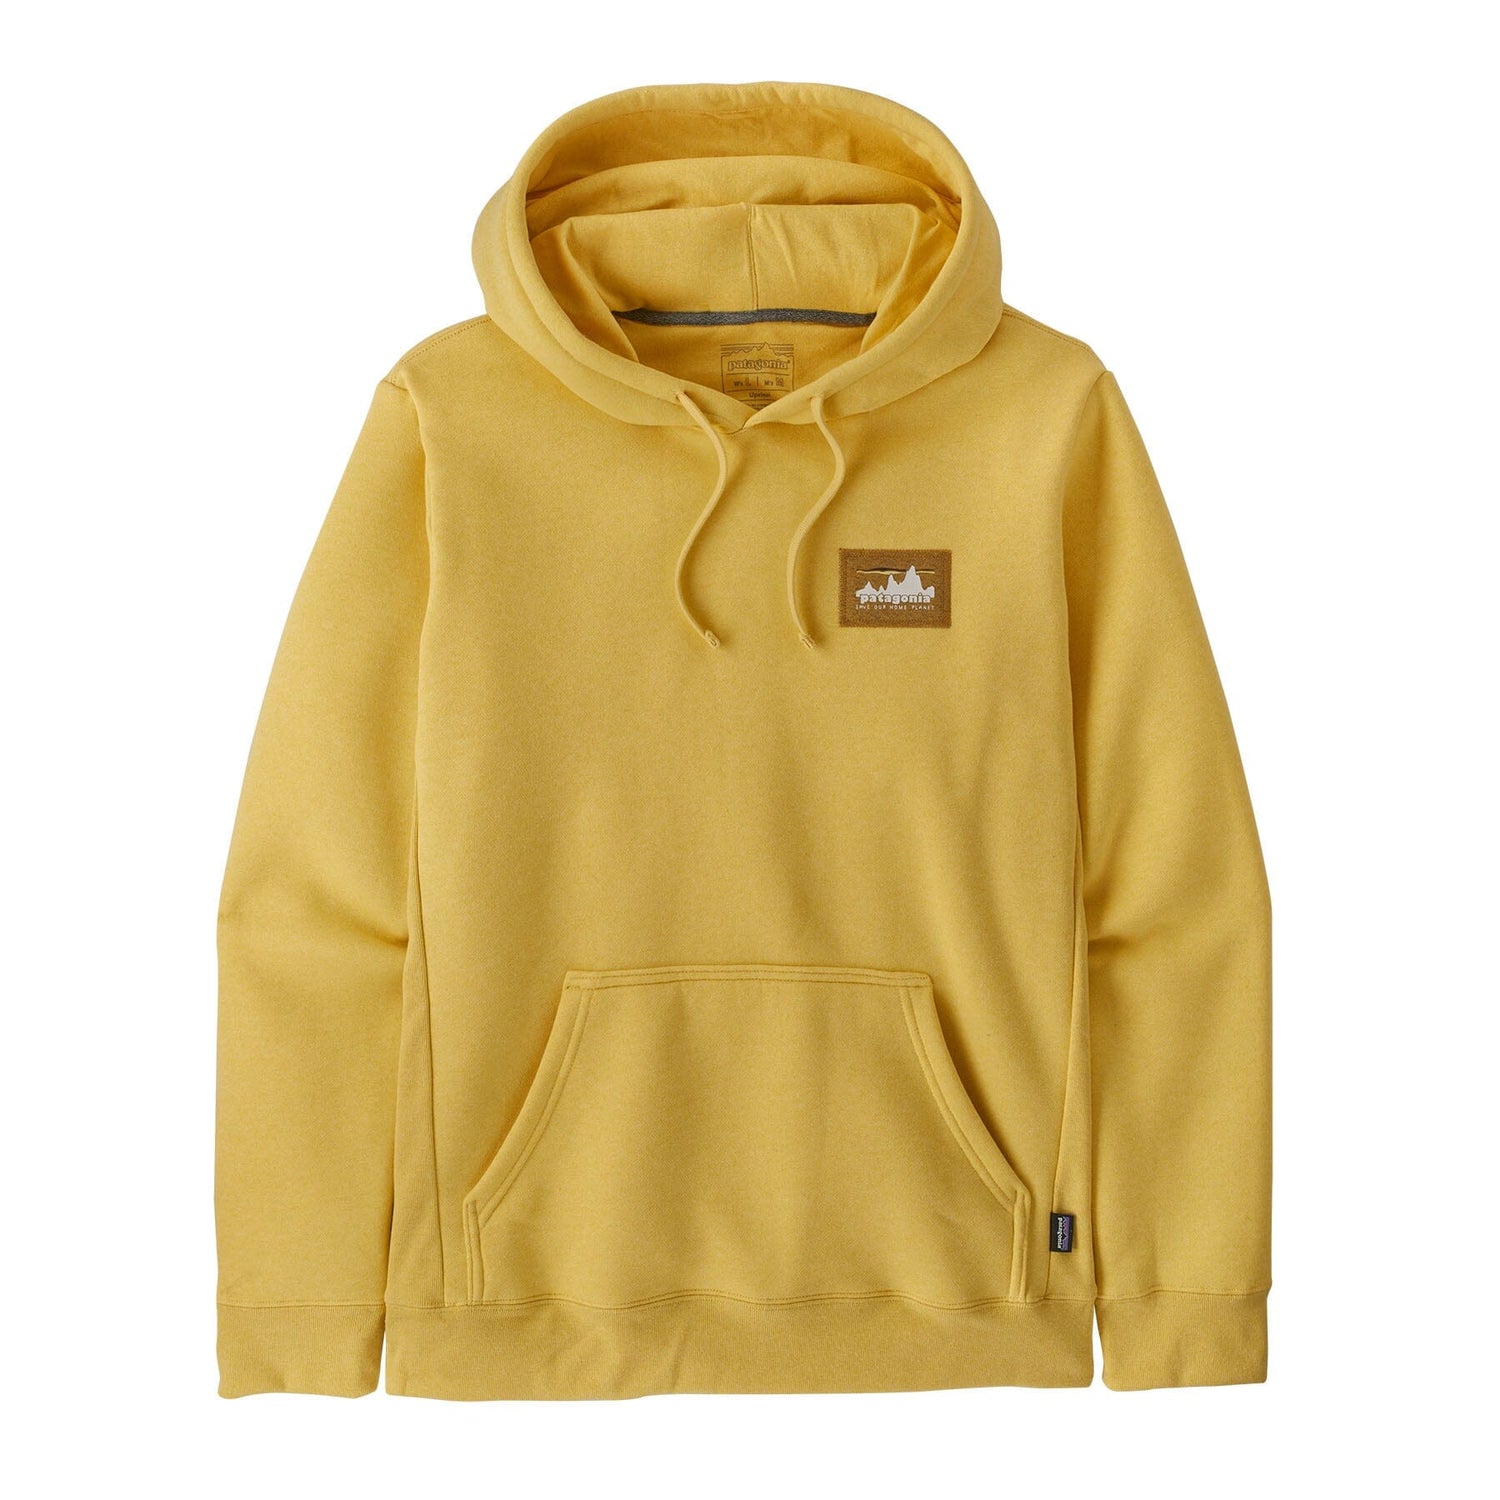 Patagonia Unisex '73 Skyline Uprisal Hoody - Recycled Polyester & Recycled Cotton Milled Yellow Shirt